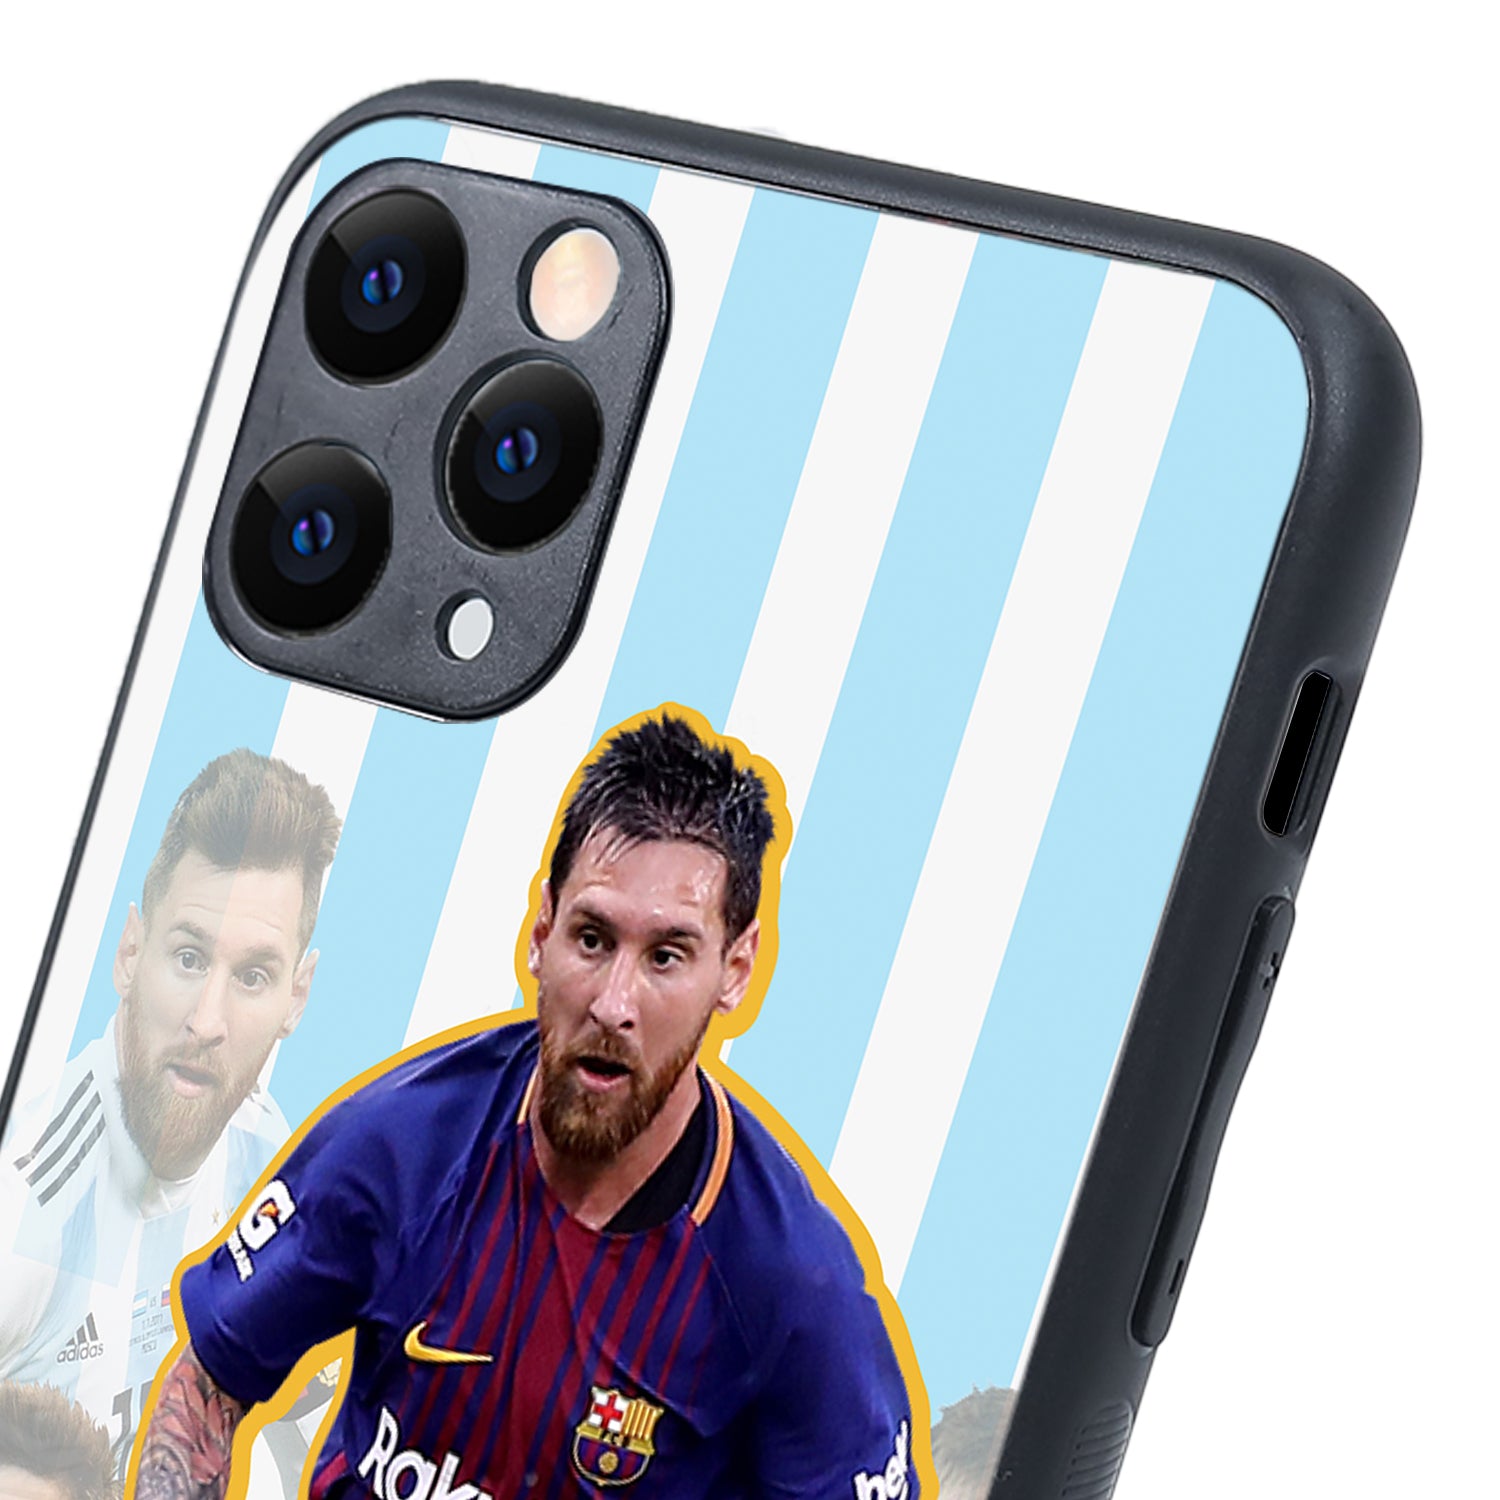 Messi Collage Sports iPhone 11 Pro Max Case